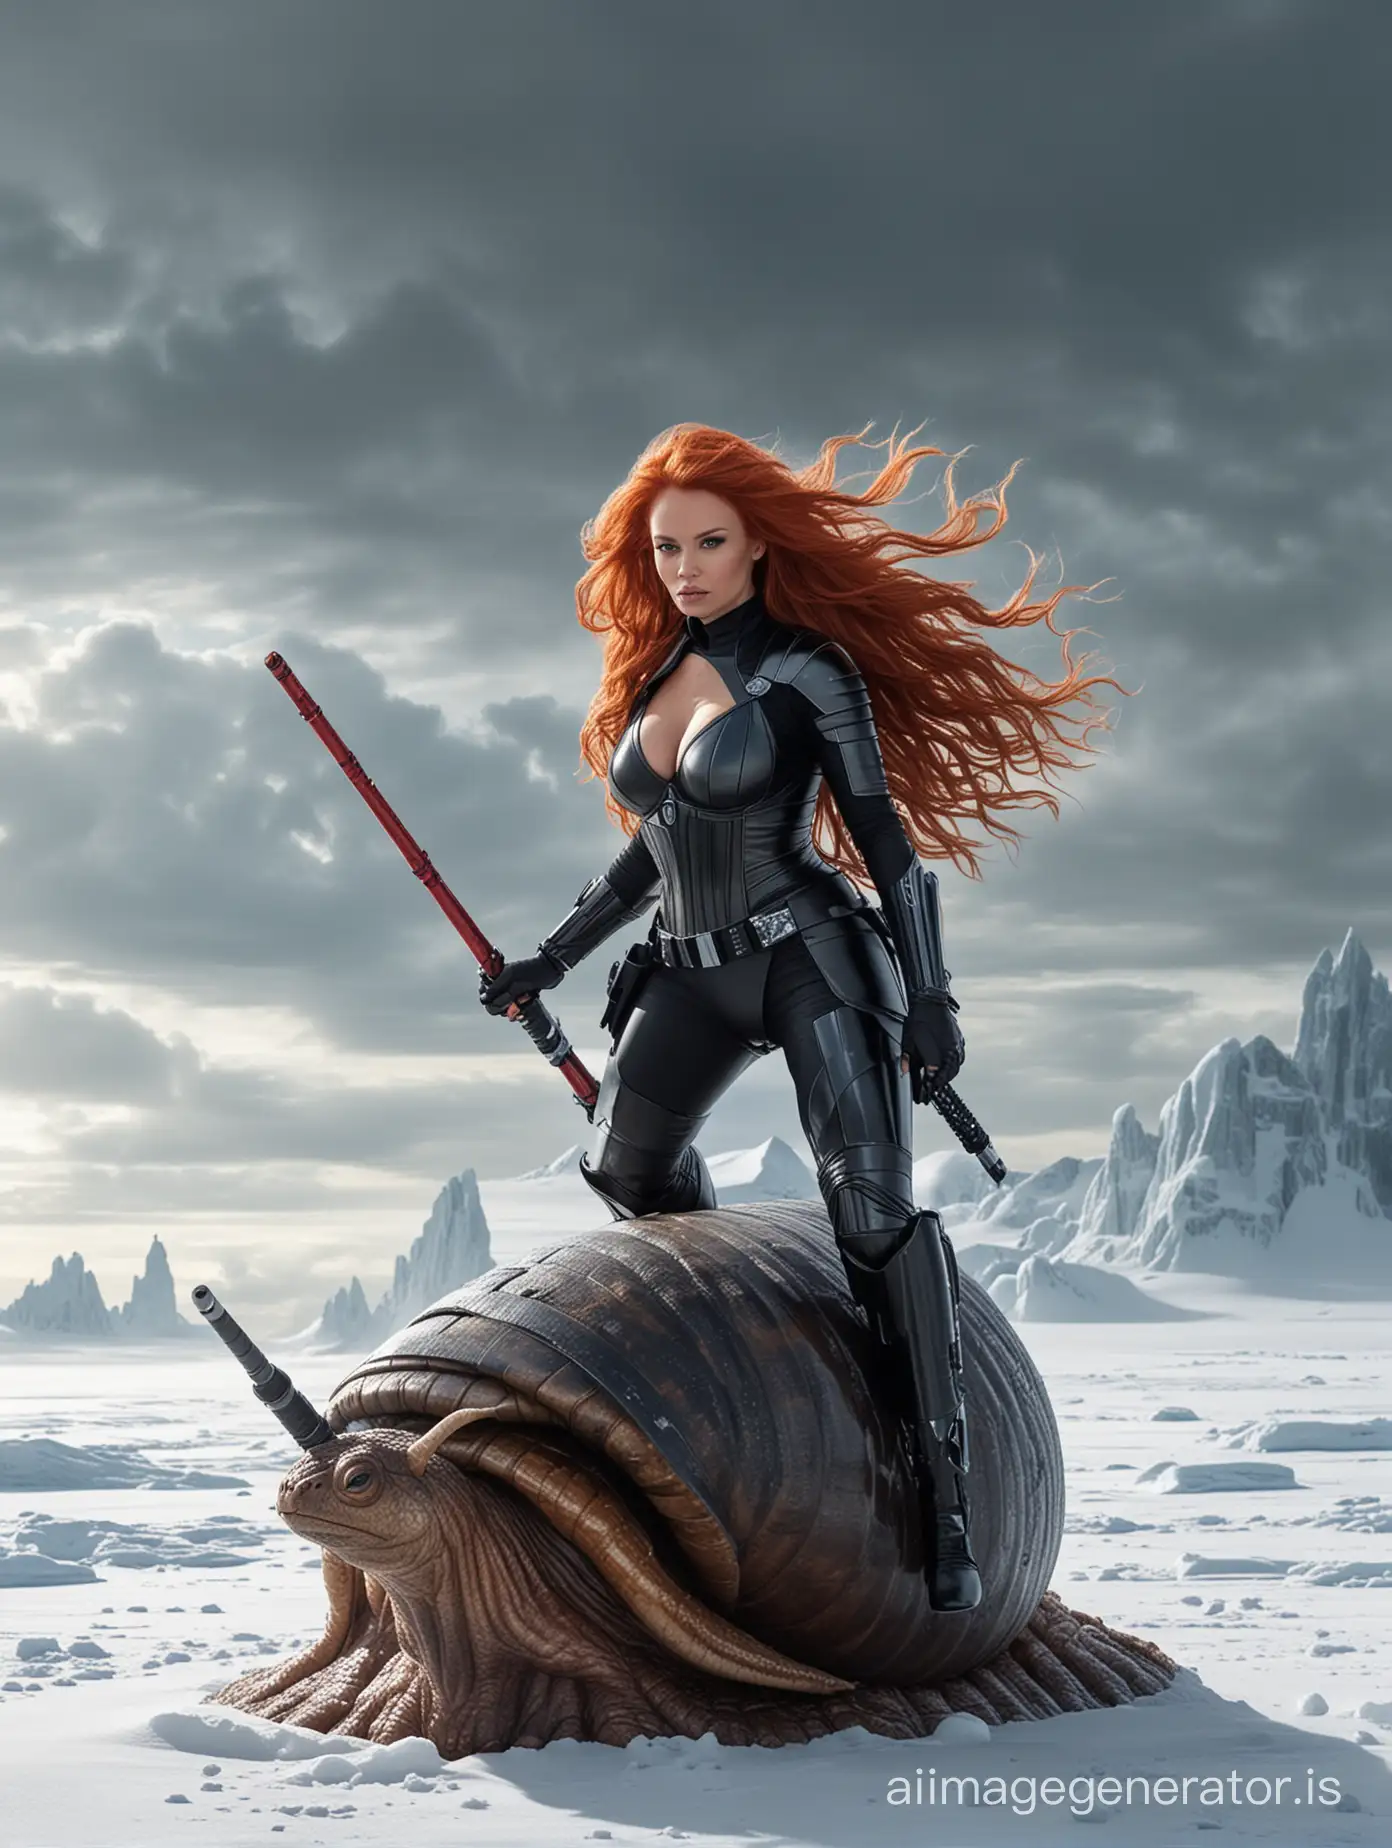 Young Pamela Anderson. full body woman riding on top of a giant snail. very long red hair. Darth Vader  armor and light saber. Star Wars troops fighting on the ground. ship battle in the sky. frozen arctic background